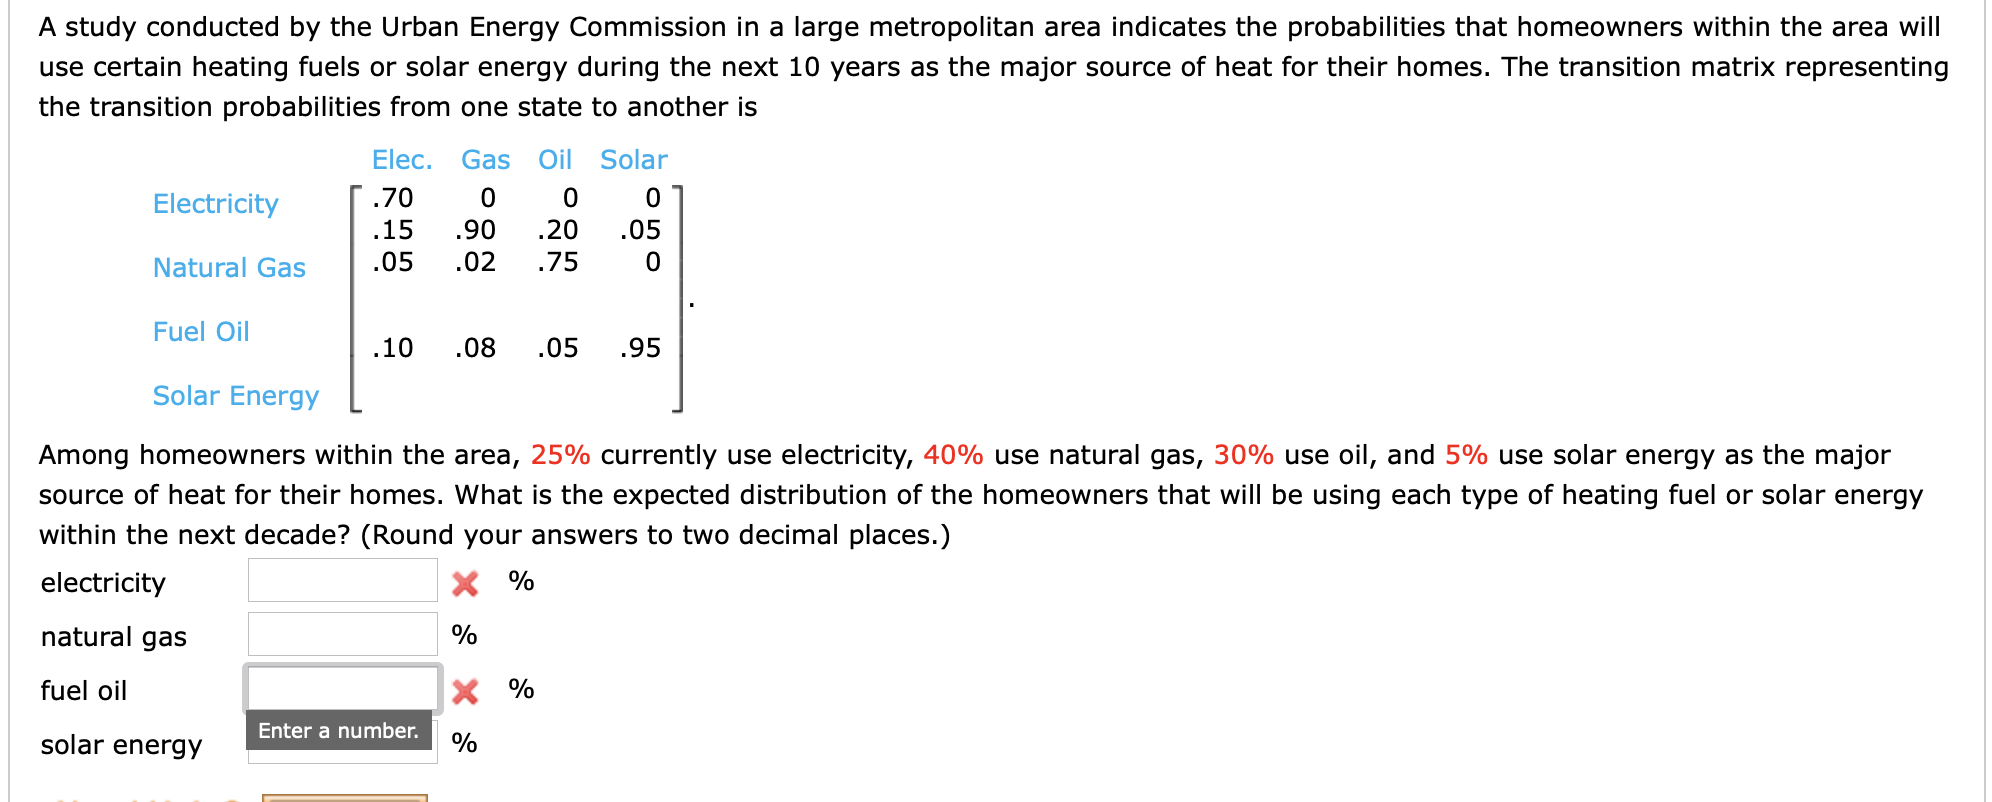 A study conducted by the Urban Energy Commission in a large metropolitan area indicates the probabilities that homeowners within the area will
use certain heating fuels or solar energy during the next 10 years as the major source of heat for their homes. The transition matrix representing
the transition probabilities from one state to another is
Elec.
Gas
Oil Solar
Electricity
.70
.15
.90
.20
.05
Natural Gas
.05
.02
.75
Fuel Oil
.10
.08
.05
.95
Solar Energy
Among homeowners within the area, 25% currently use electricity, 40% use natural gas, 30% use oil, and 5% use solar energy as the major
source of heat for their homes. What is the expected distribution of the homeowners that will be using each type of heating fuel or solar energy
within the next decade? (Round your answers to two decimal places.)
electricity
X %
natural gas
%
fuel oil
X %
Enter a number.
solar energy
